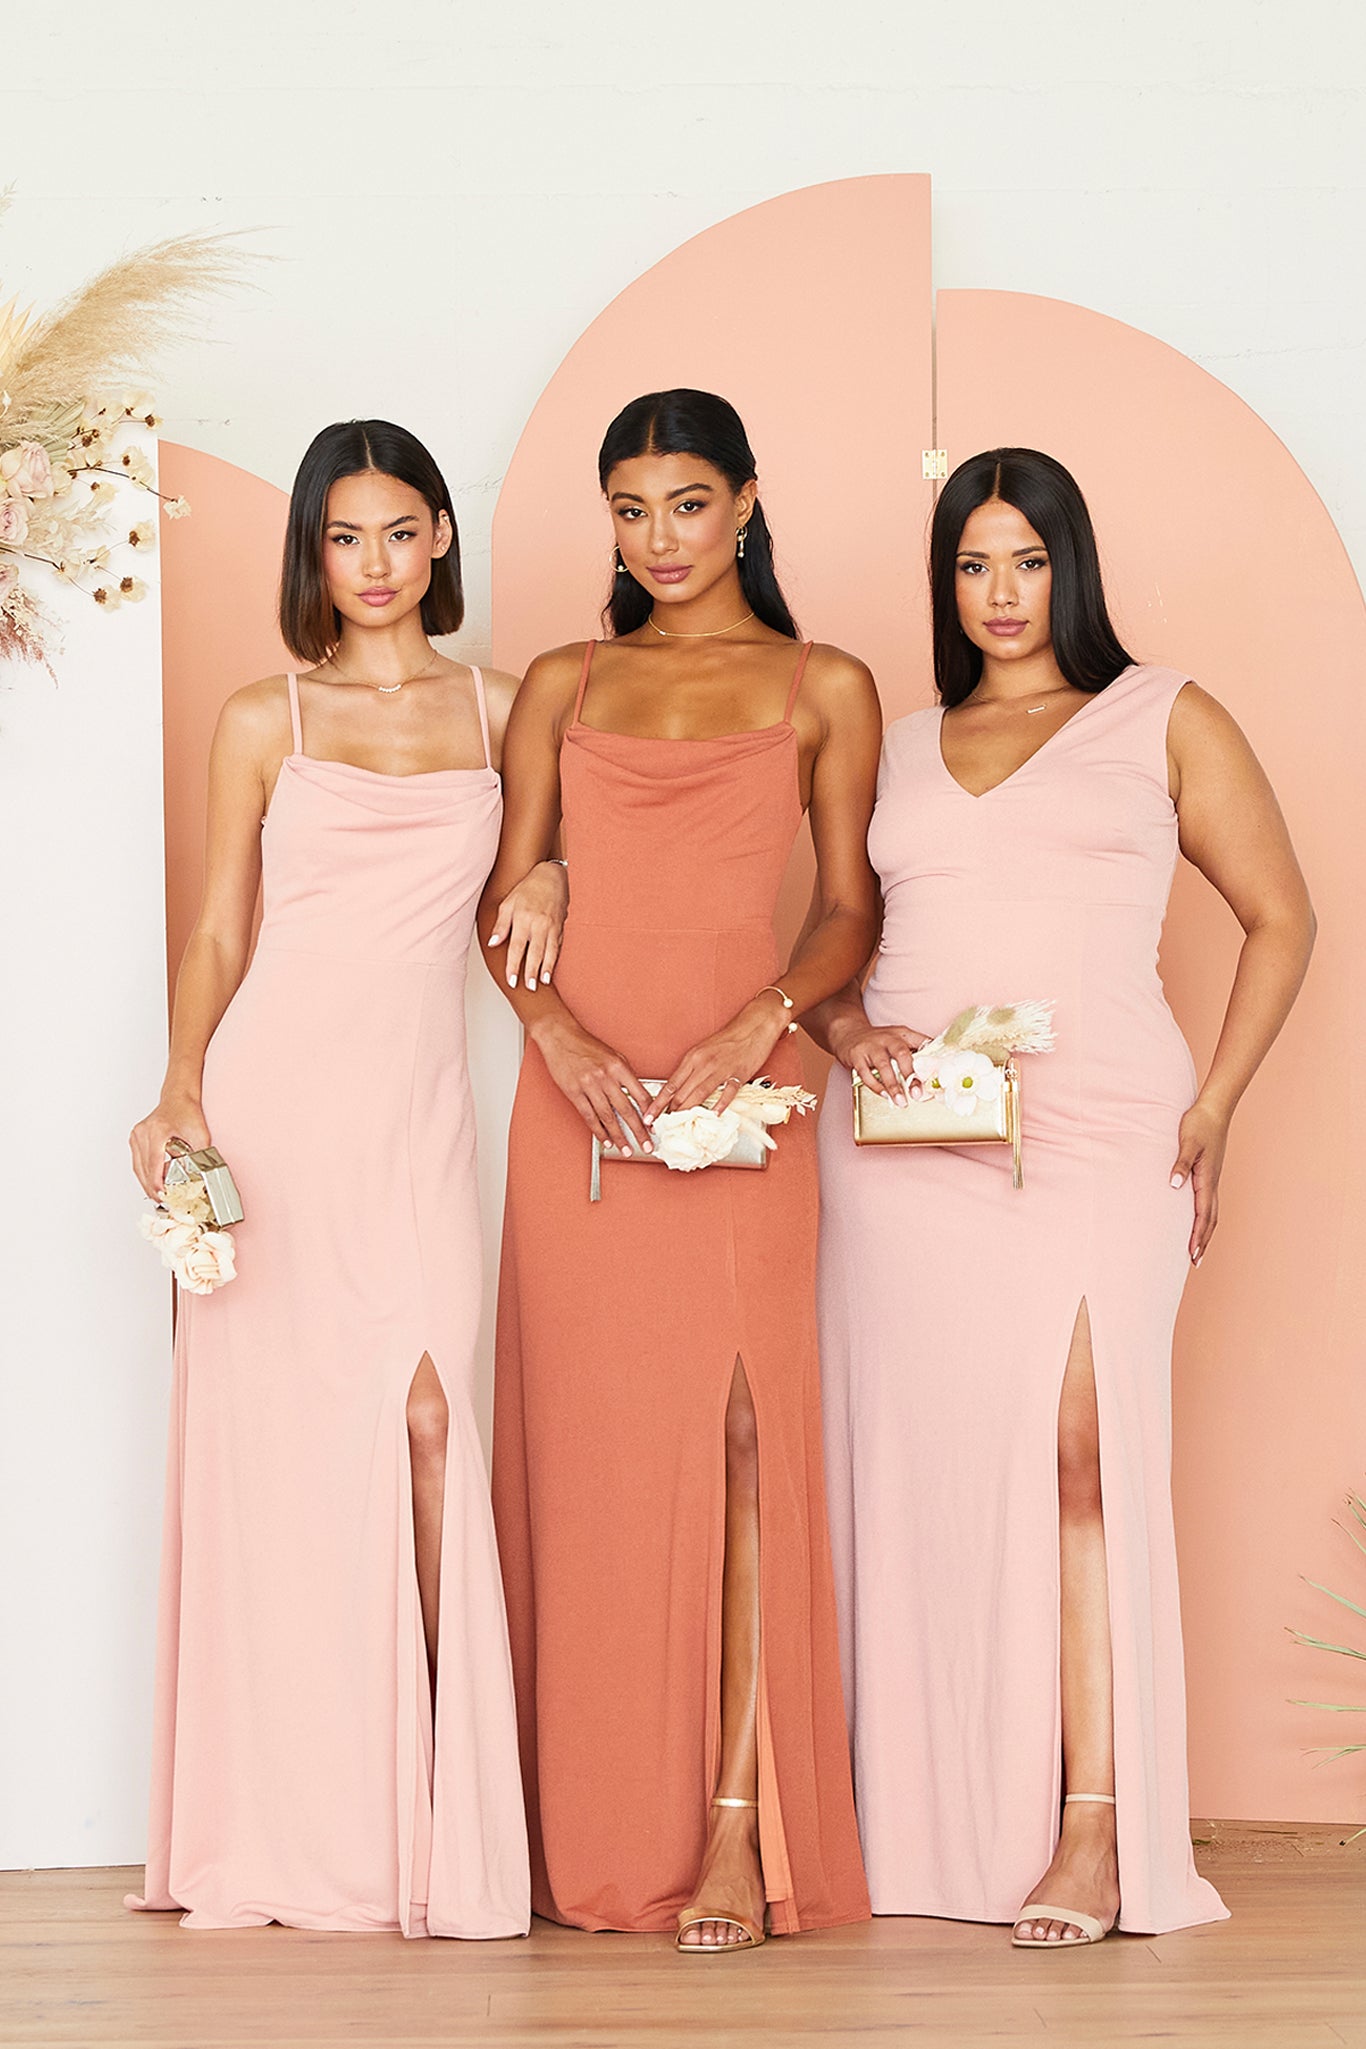 Front view of three models standing together and wearing bridesmaid dresses in shades of pink. A slender model with a medium-light skin tone on the left wears a dusty rose crepe Ash Bridesmaid Dress. In the center, a slender model with a medium skin tone wears a terracotta crepe Ash Bridesmaid Dress. On the right, a curvy model with a medium-light skin tone wears a dusty rose crepe Shamin Curve Bridesmaid Dress.